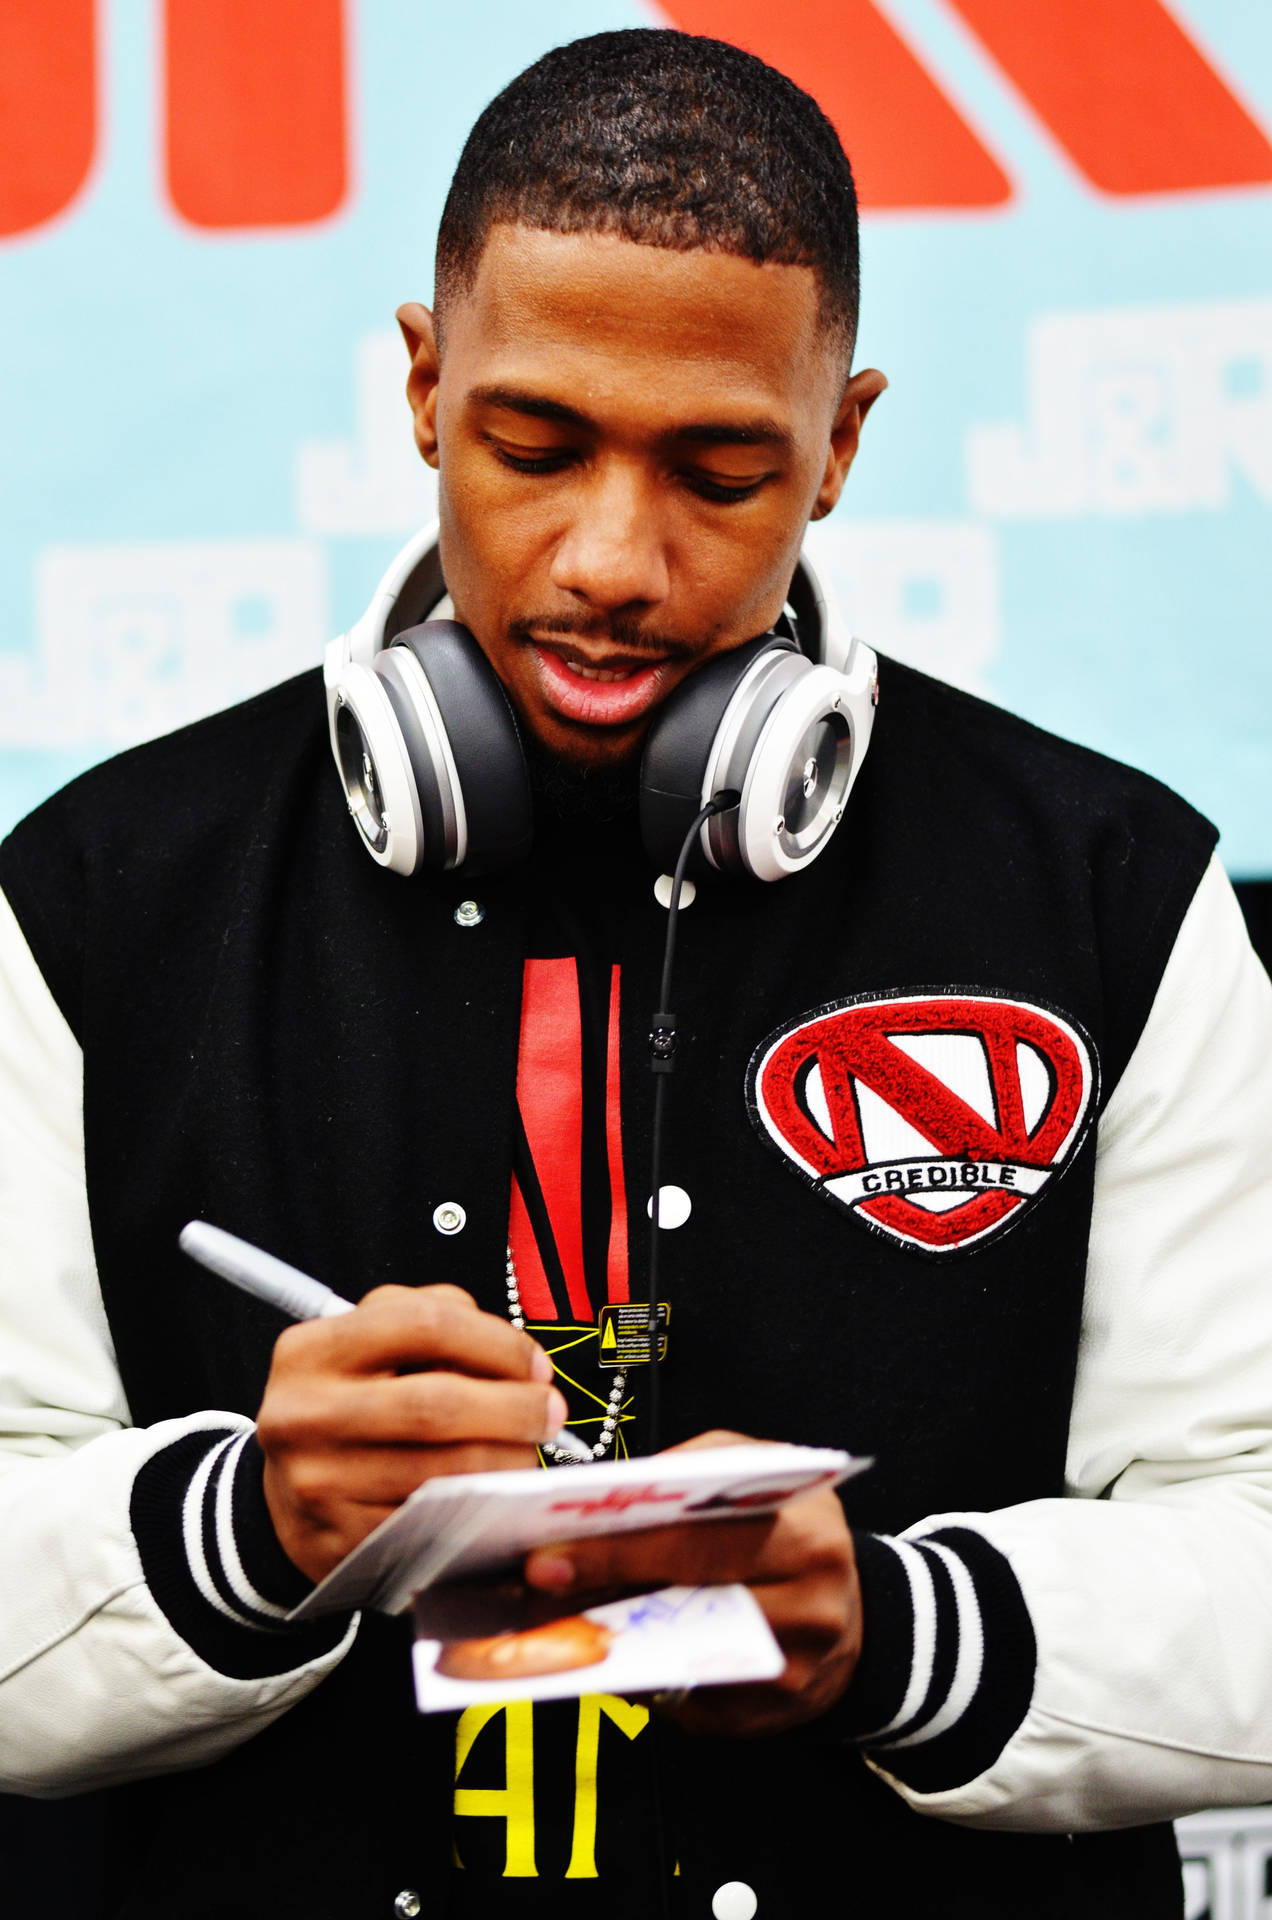 Nick Cannon Signing Autographs Background